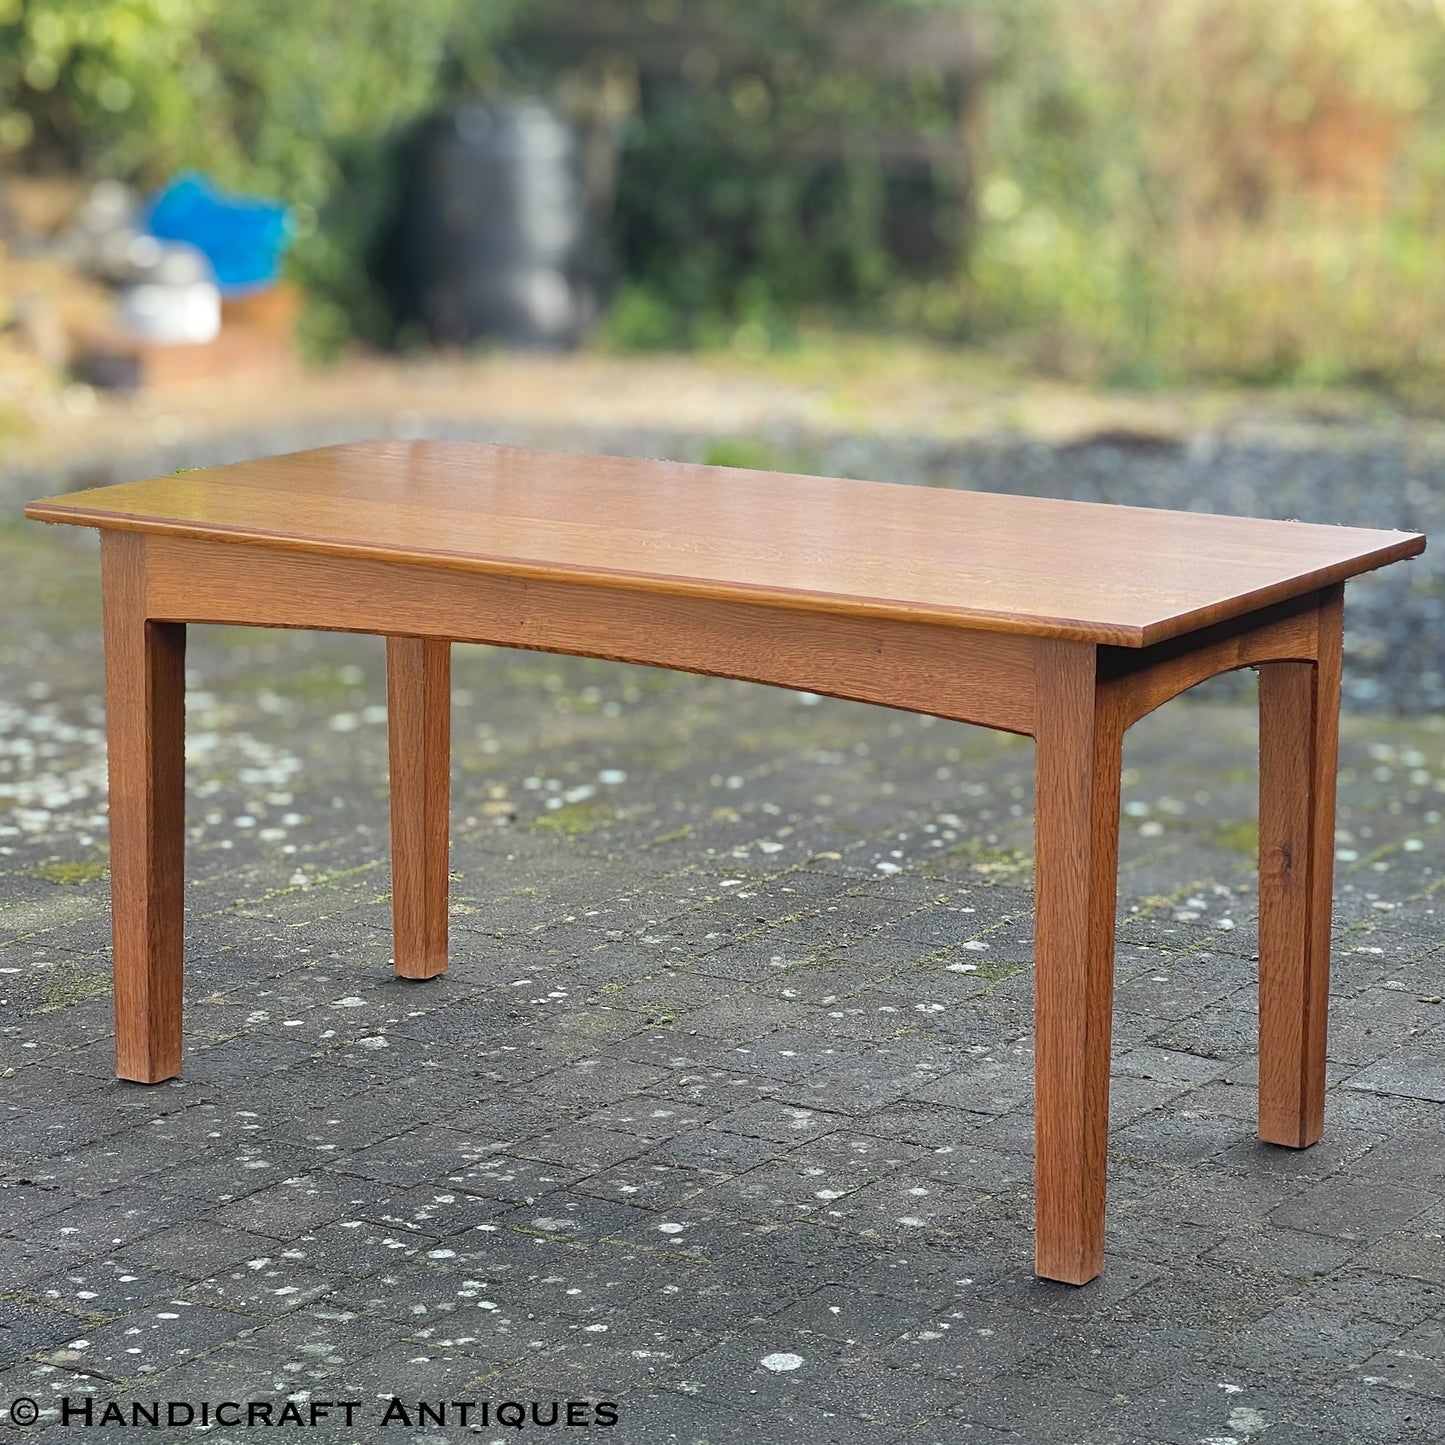 Peter Hall of Staveley Arts & Crafts Lakes School English Oak Dining Table c. 1990.